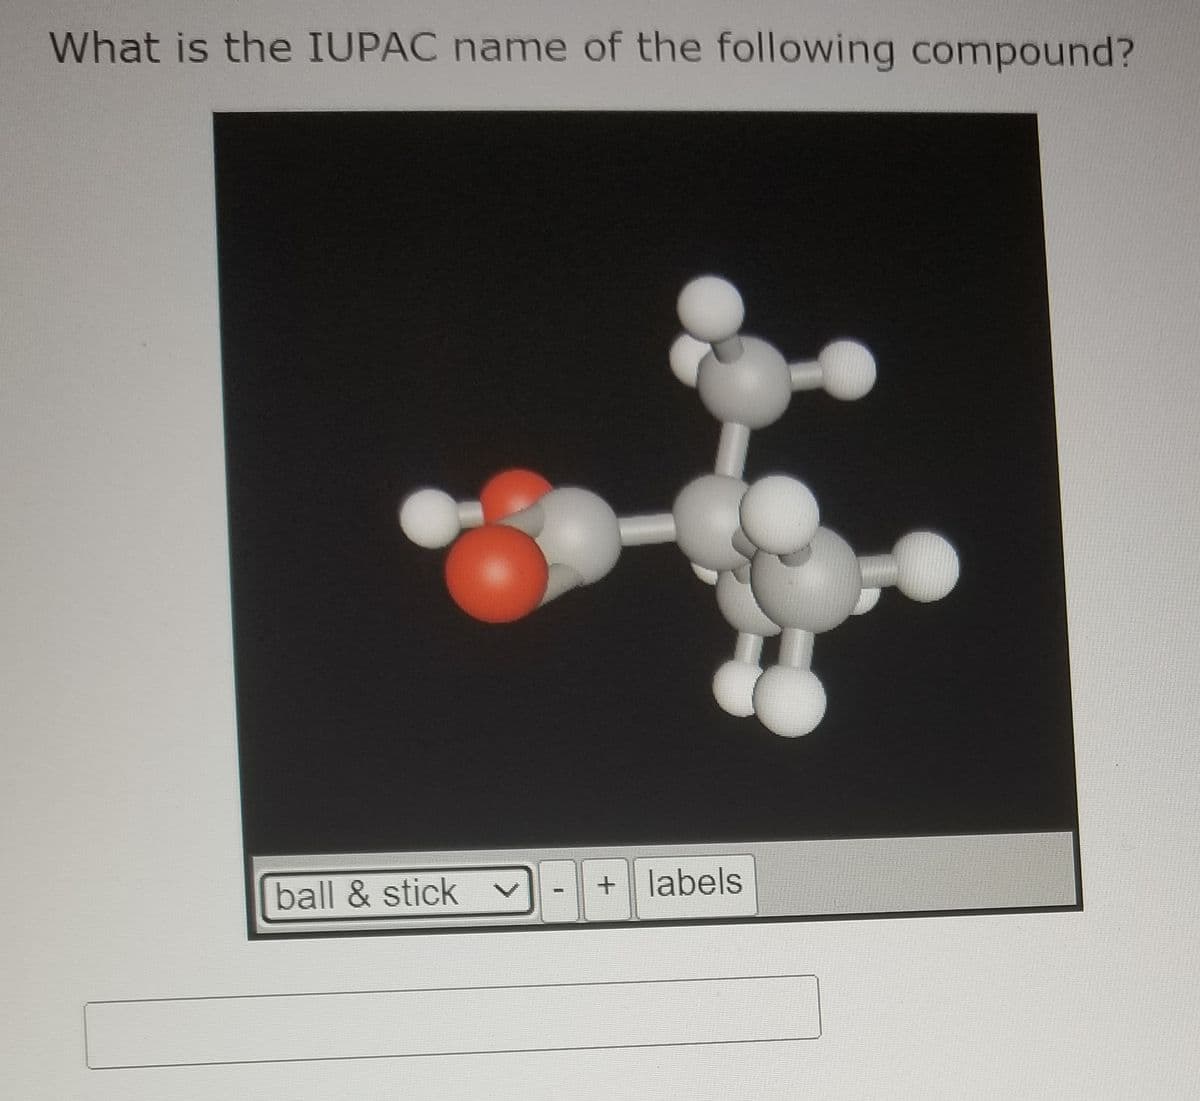 What is the IUPAC name of the following compound?
ball & stick
+ labels
